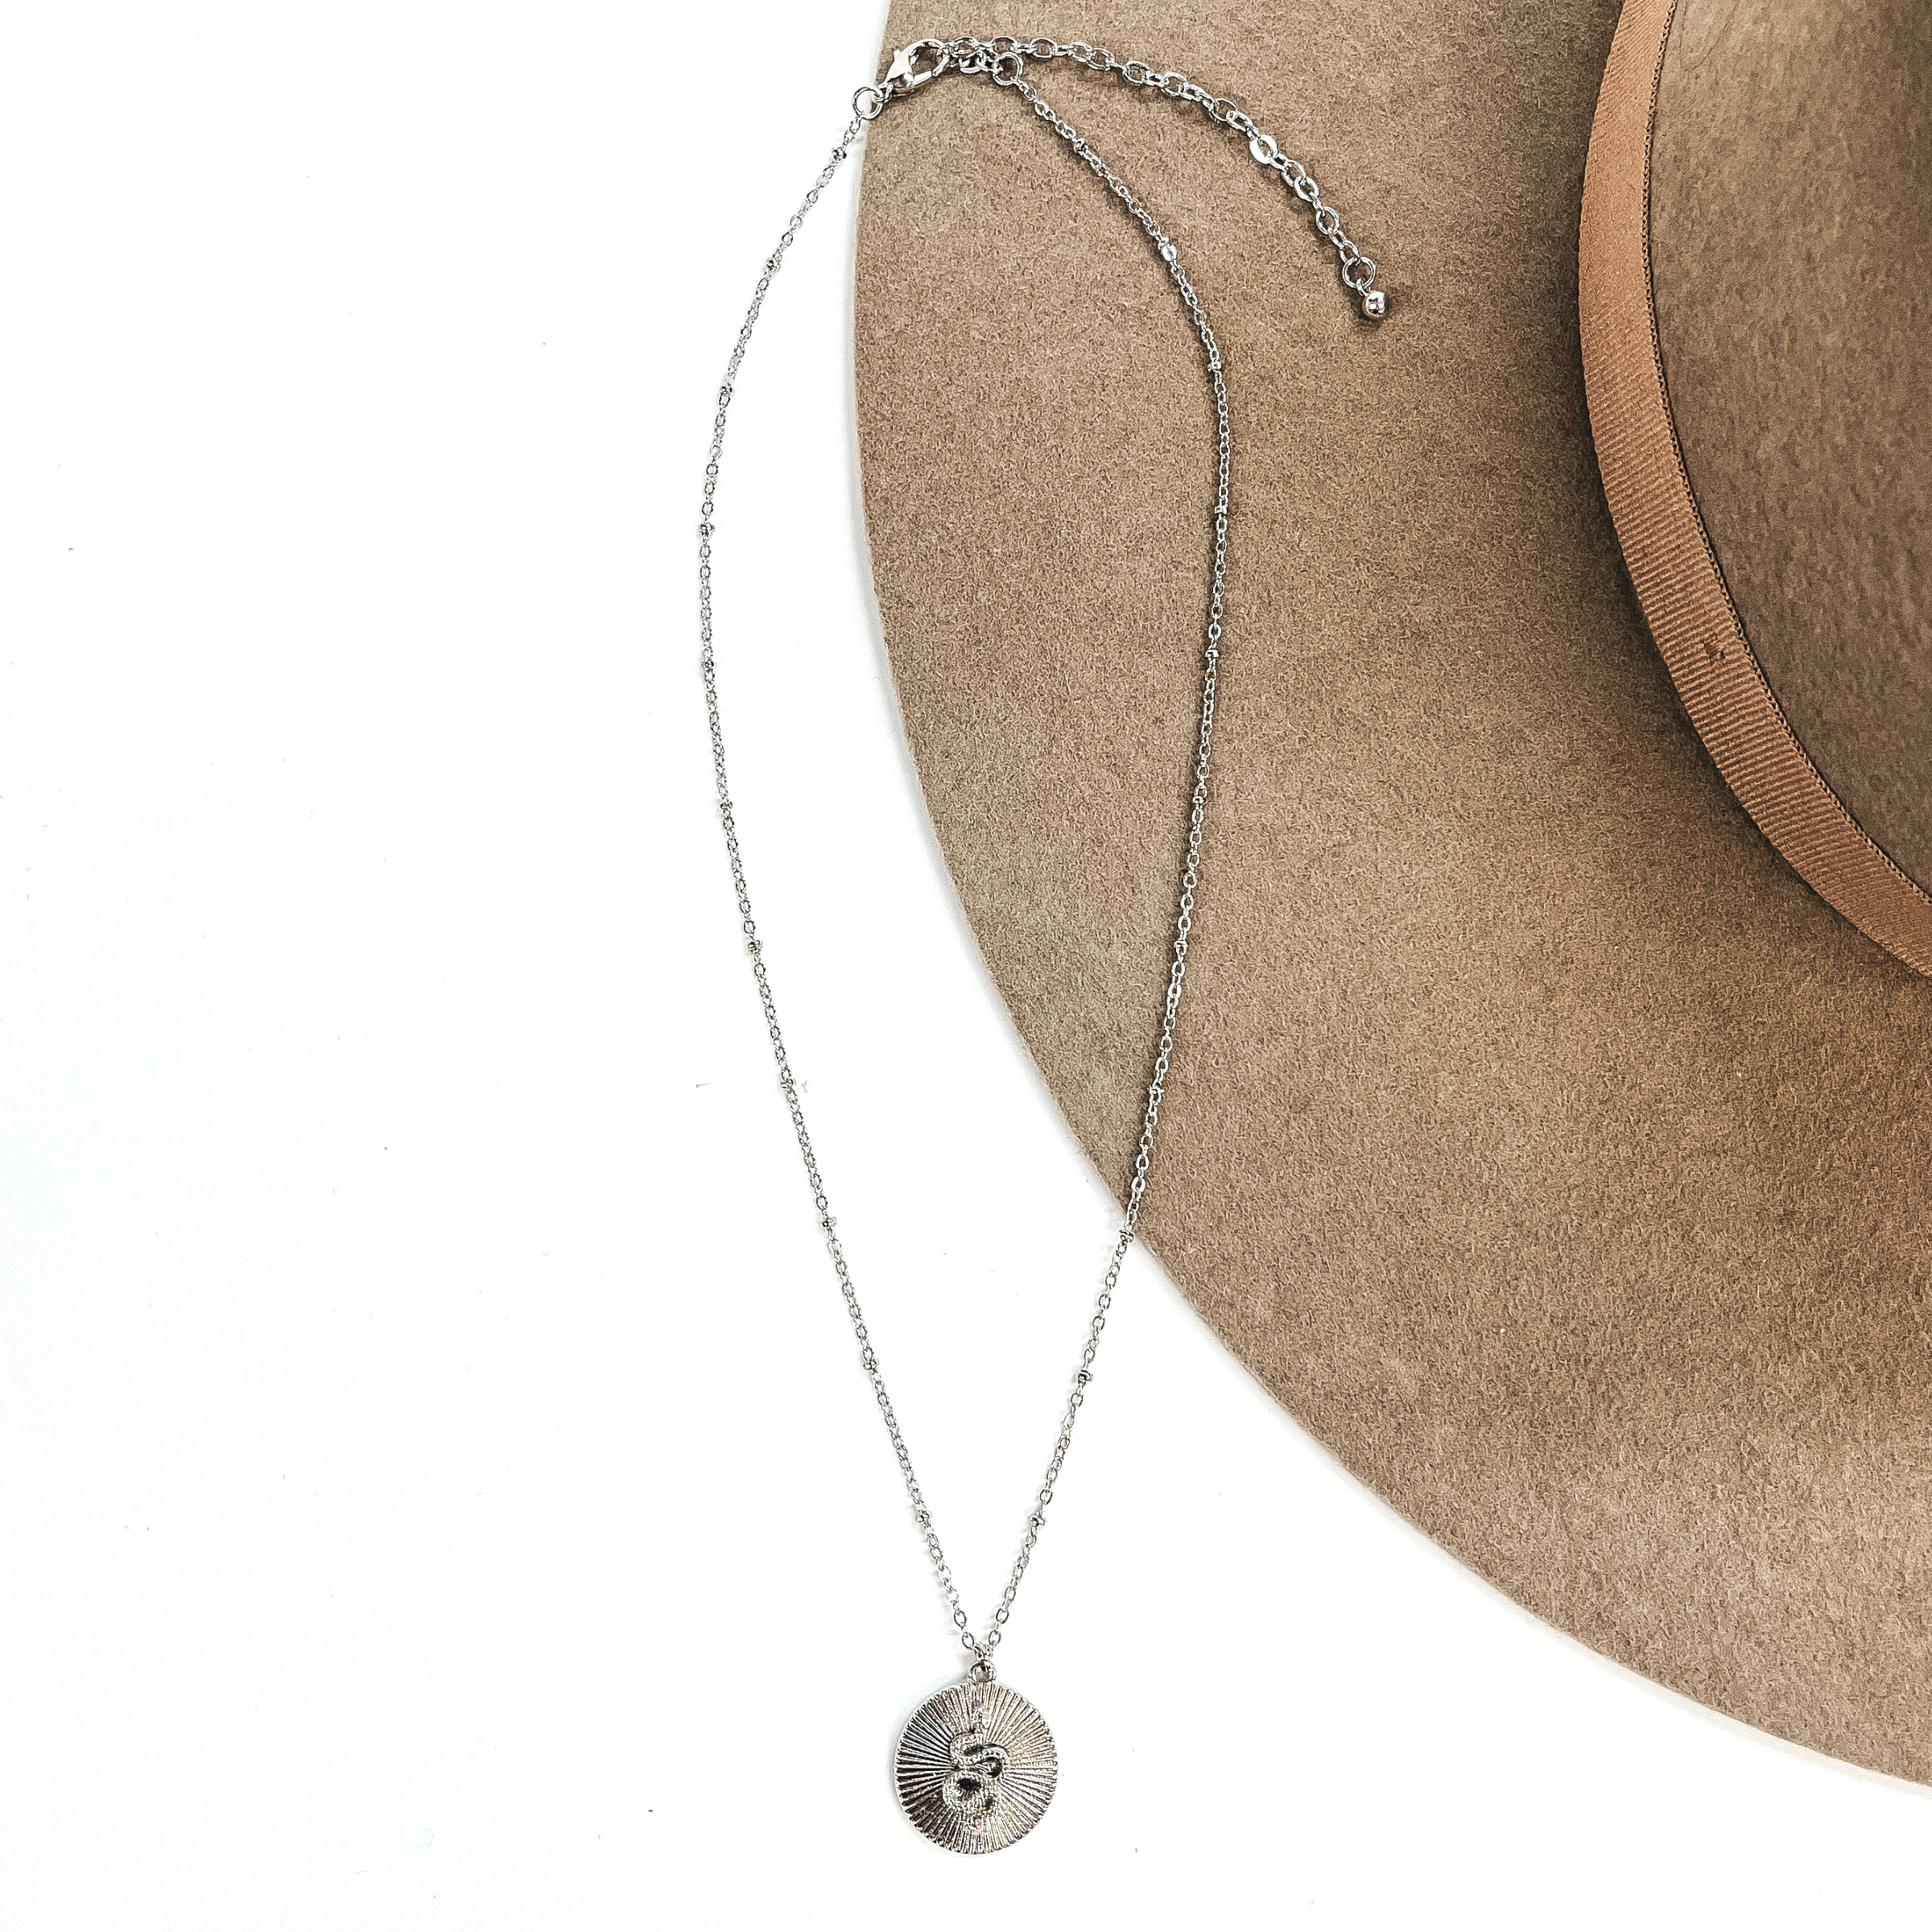 This is a small thin silver chain necklace with a small circle pendant in  textured sunburst. The pendant has a small snake in the center. This necklace  is taken on a white background and on a beige felt hat.